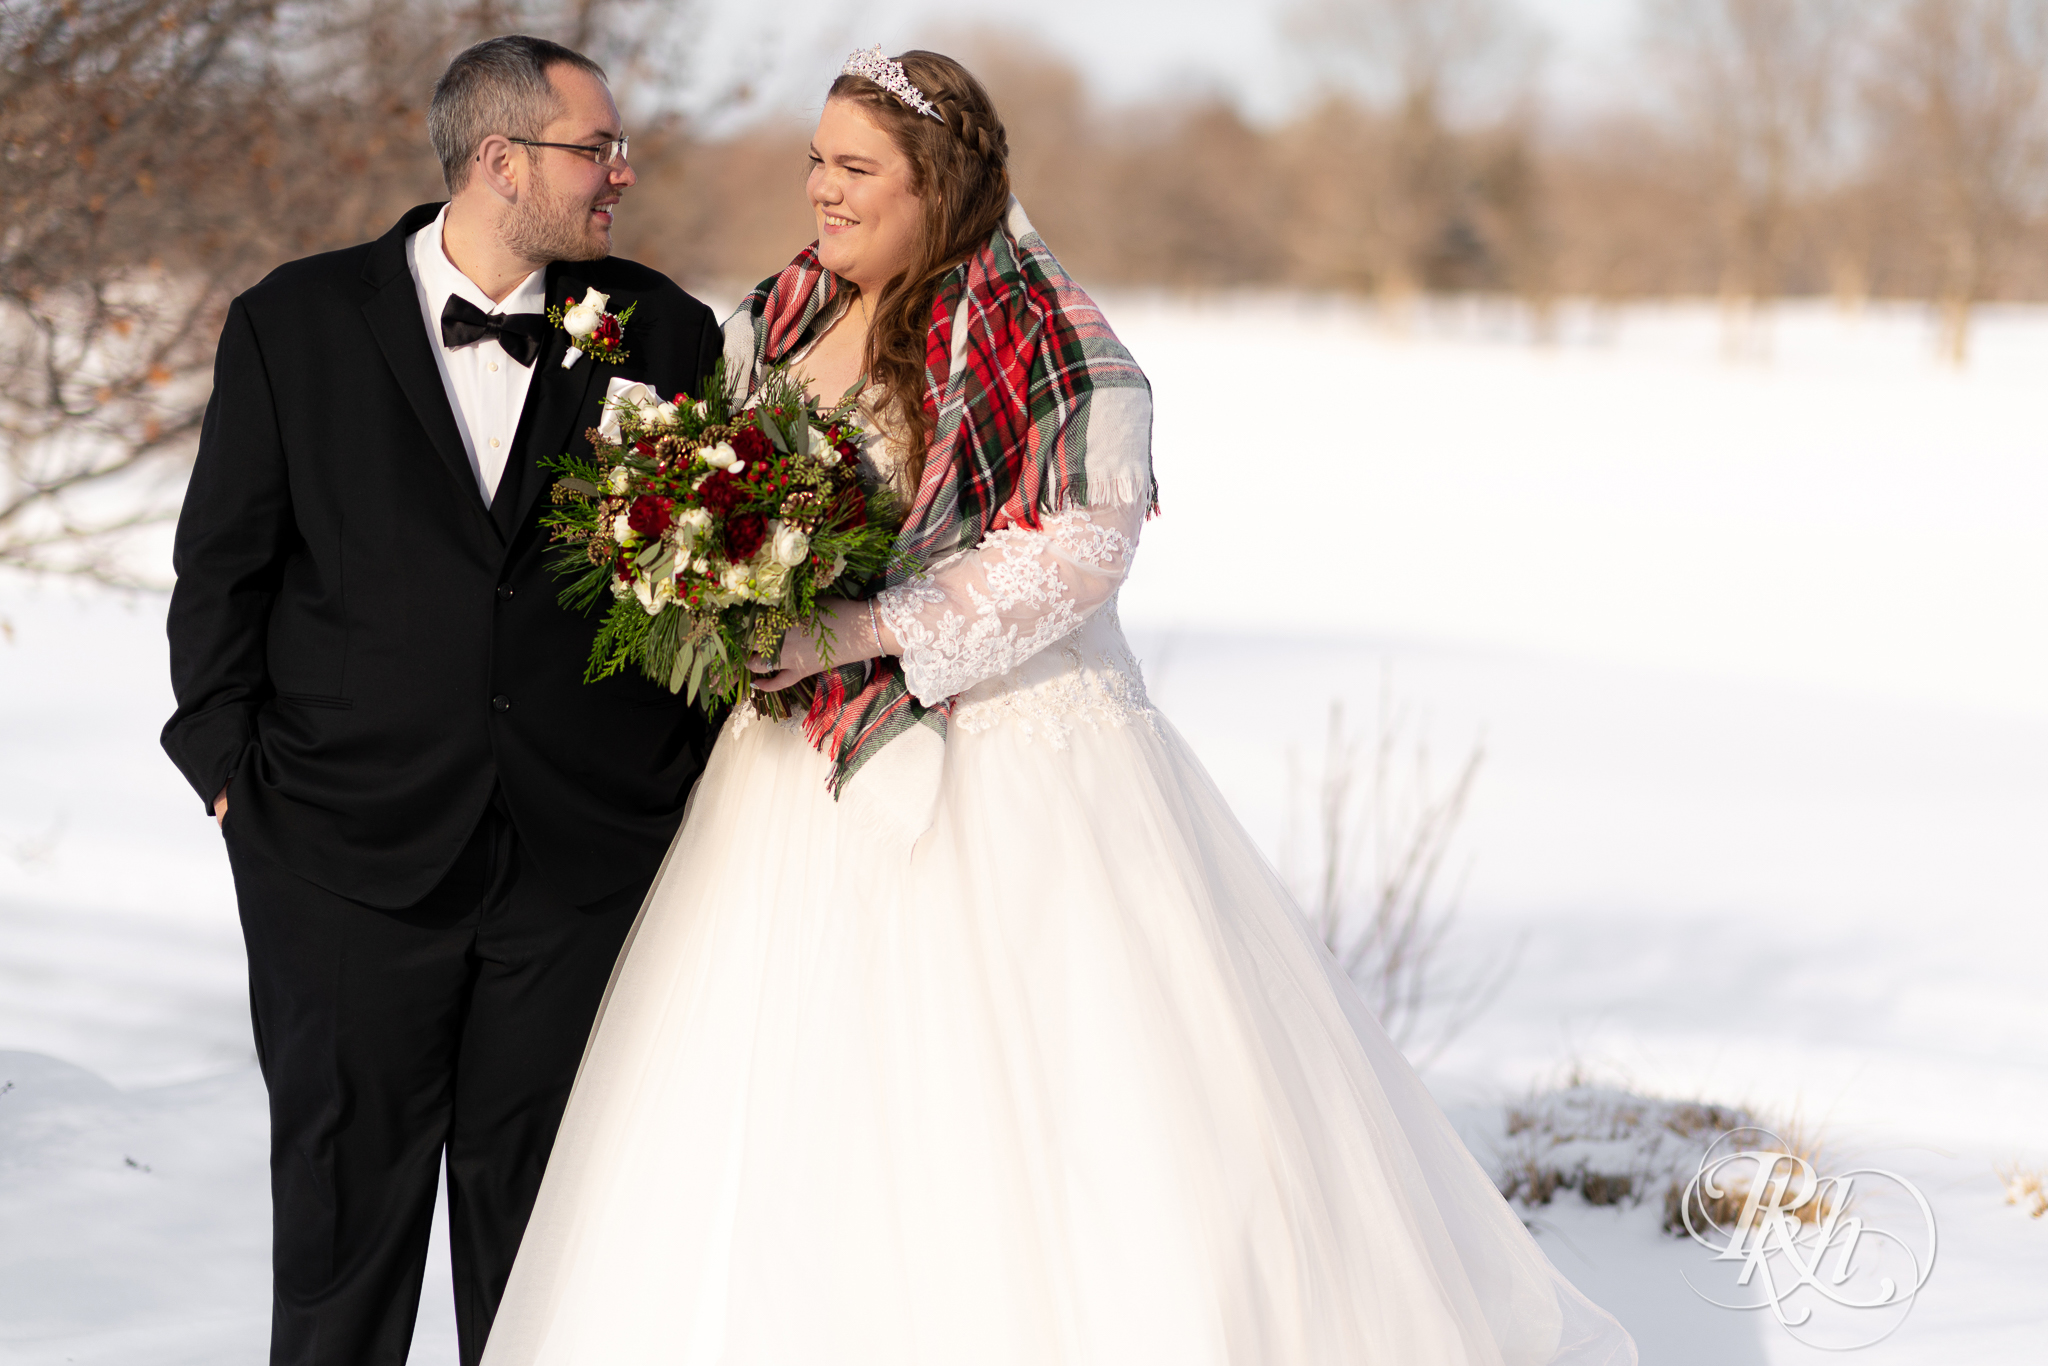 Bride and groom smiling in the snow at Christmas wedding at Oak Glen Golf Course in Stillwater, Minnesota.